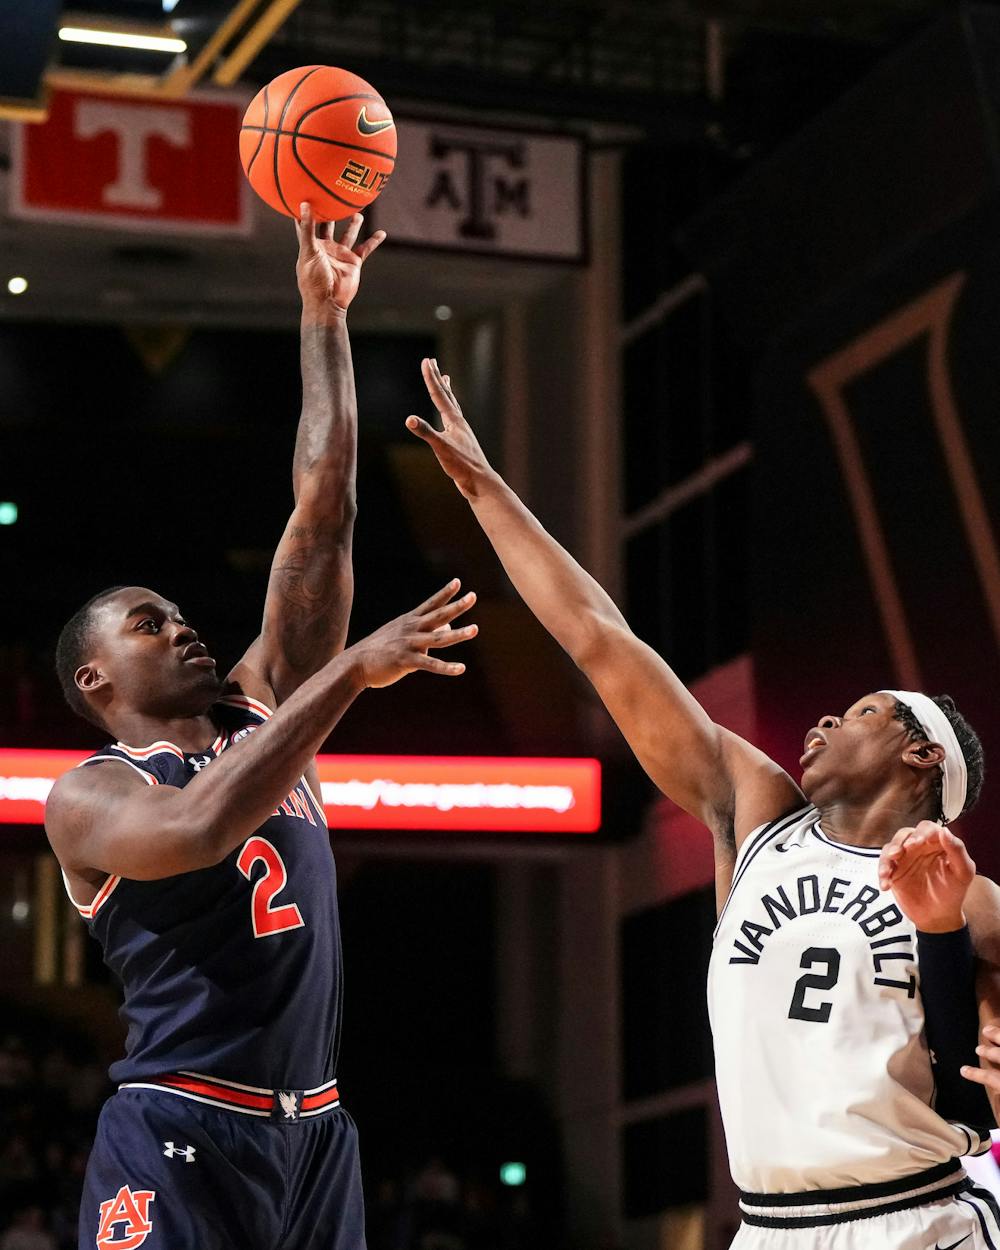 NASHVILLE, TN - JANUARY 17 - Auburn's Jaylin Williams (2) during the game between the  #13 Auburn Tigers and the Vanderbilt Commodores at Memorial Gymnasium in Nashville, TN on Wednesday, Jan. 17, 2024.

Photo by Zach Bland/Auburn Tigers